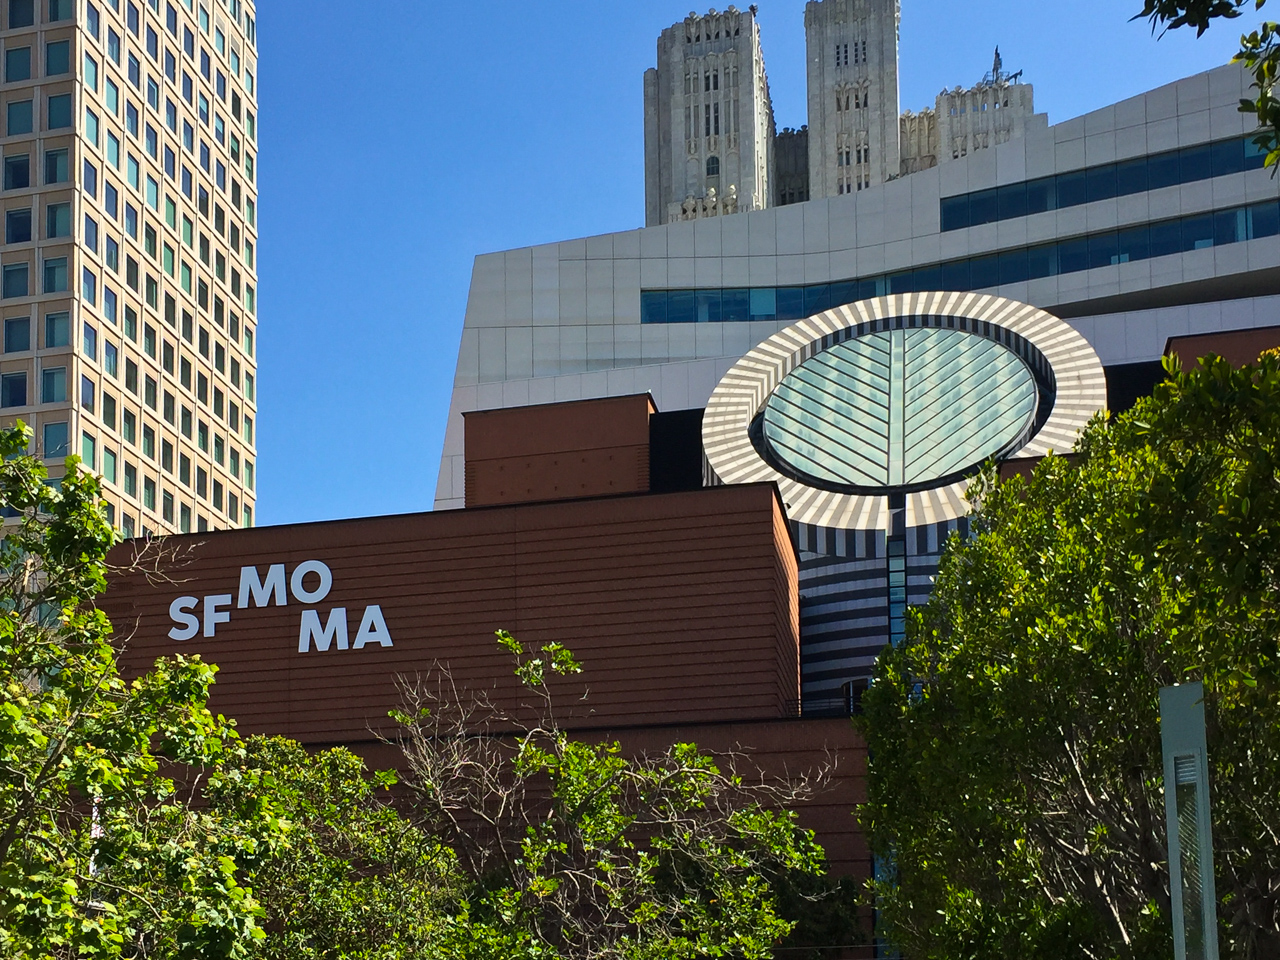 The new reopened SF MOMA 2016, awesome